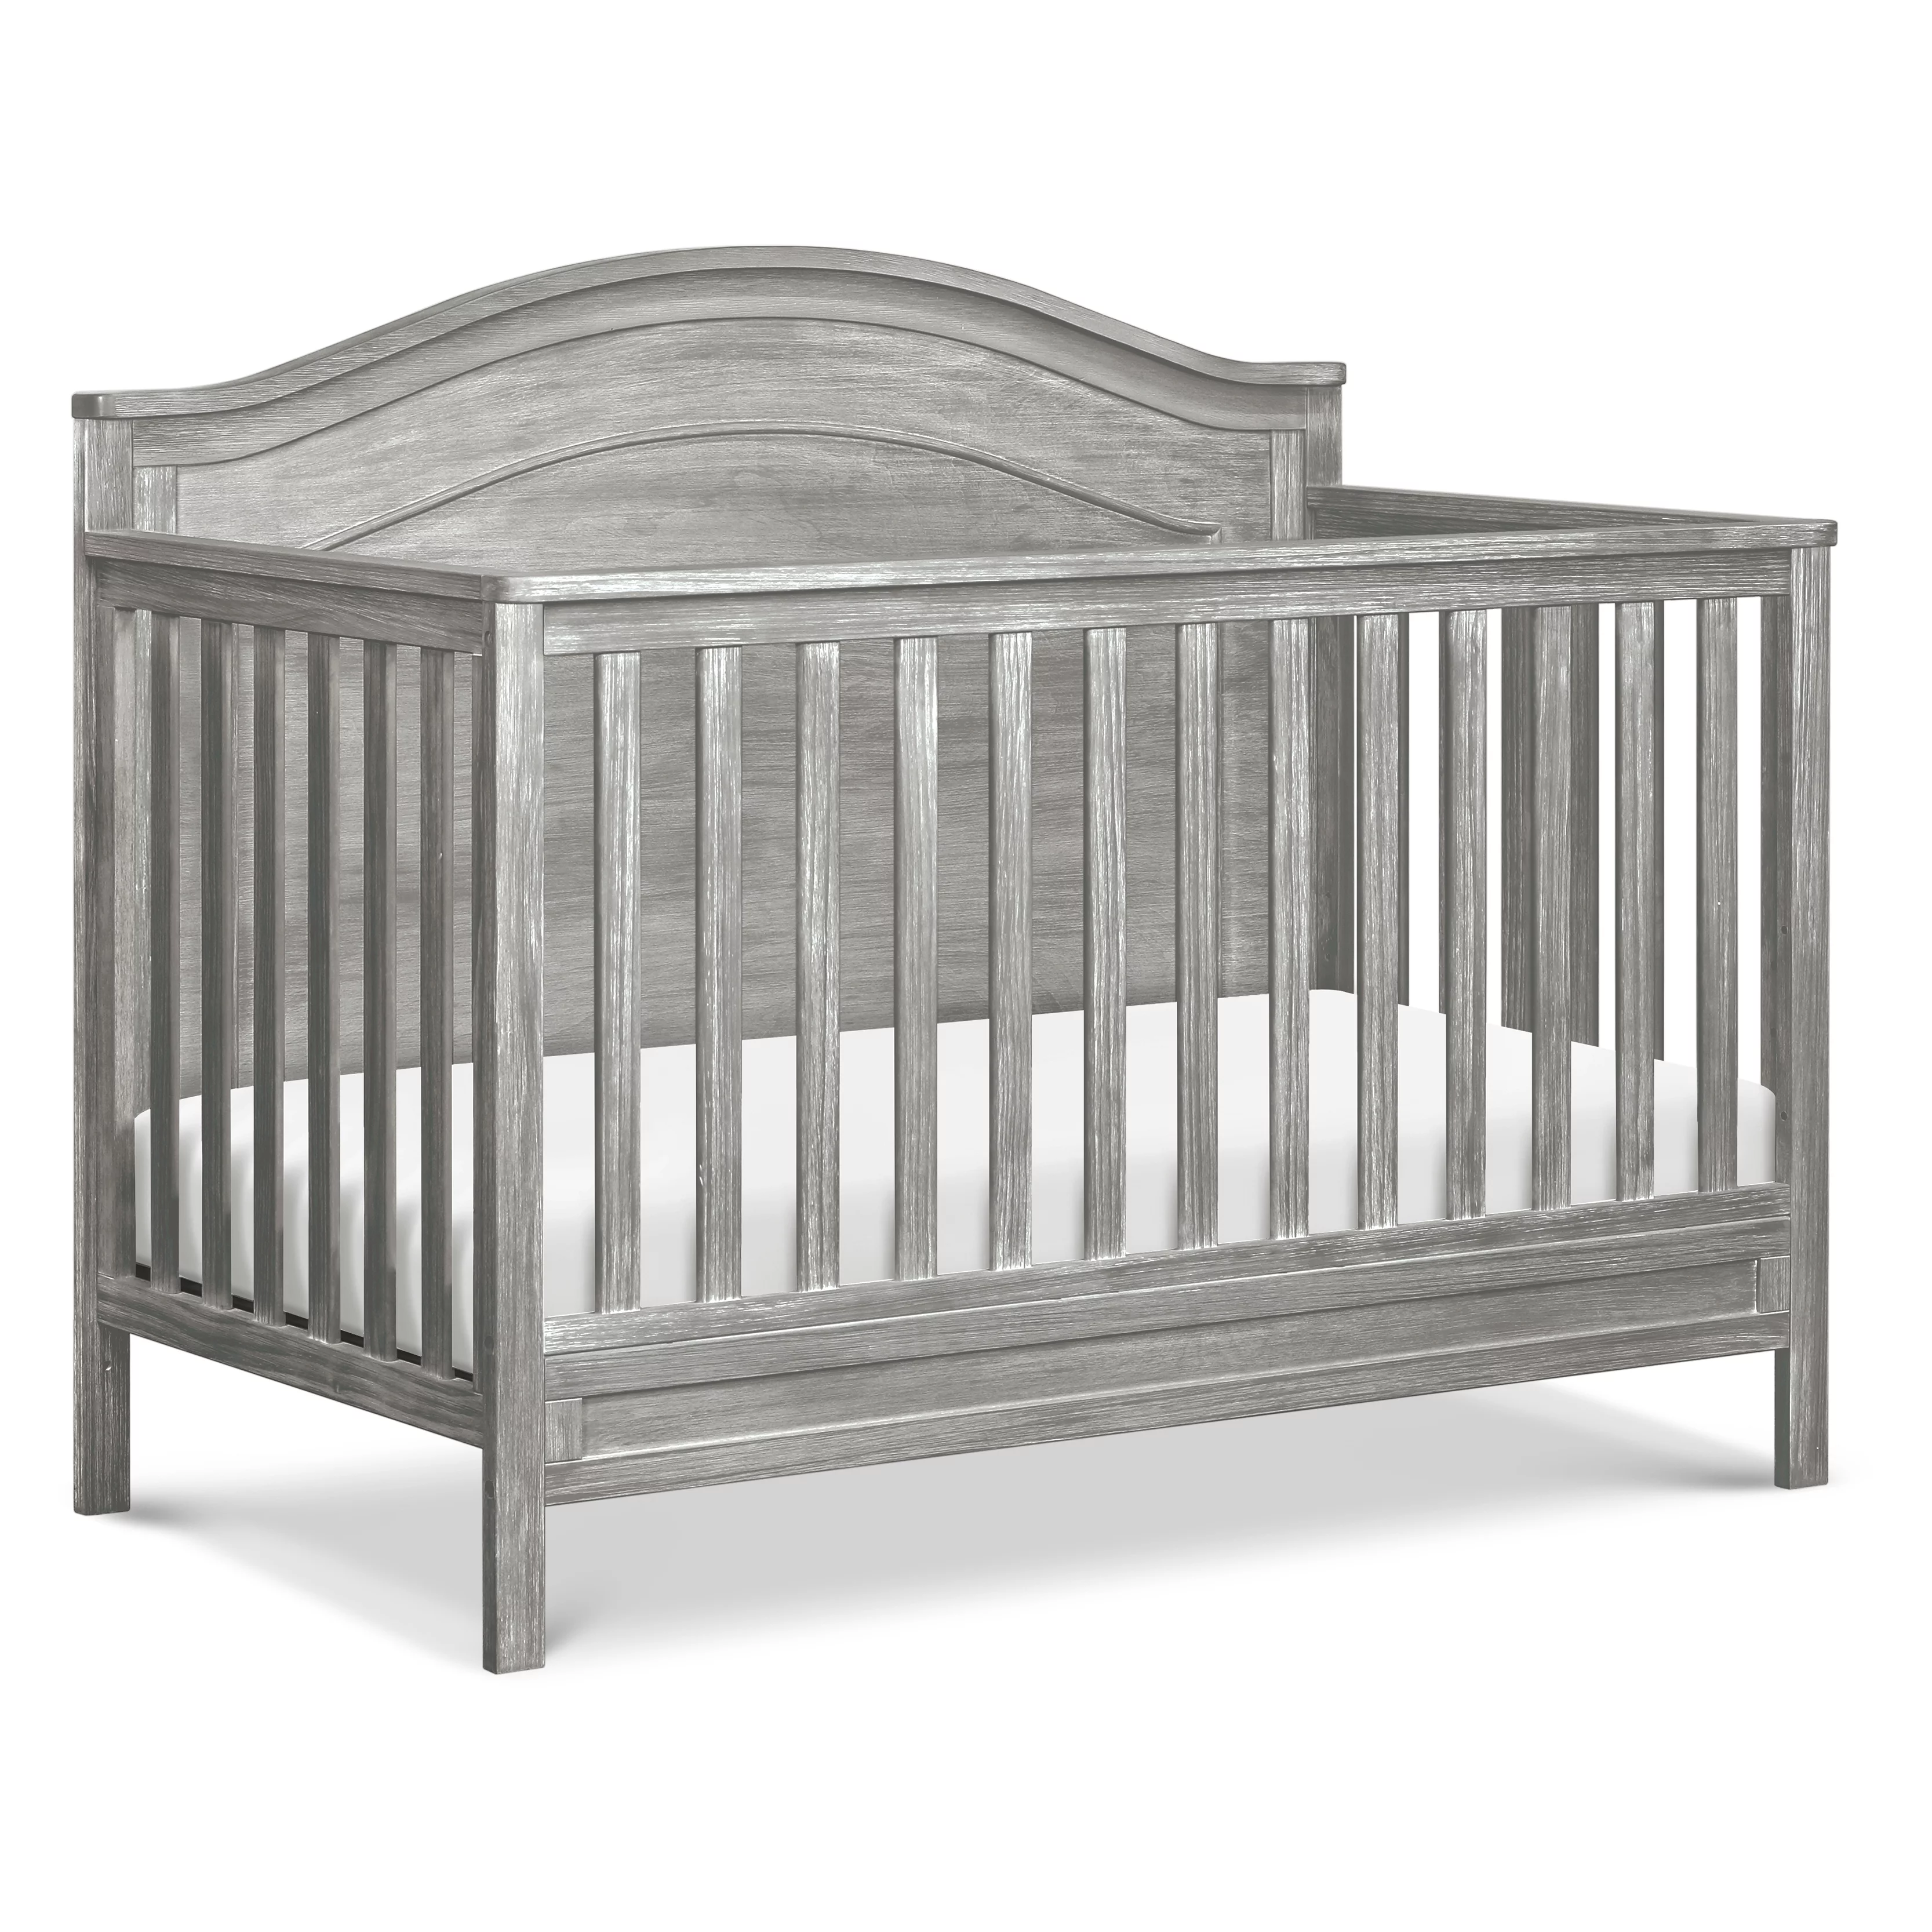 DaVinci Baby Charlie 4-in-1 Convertible Crib in Cottage Grey